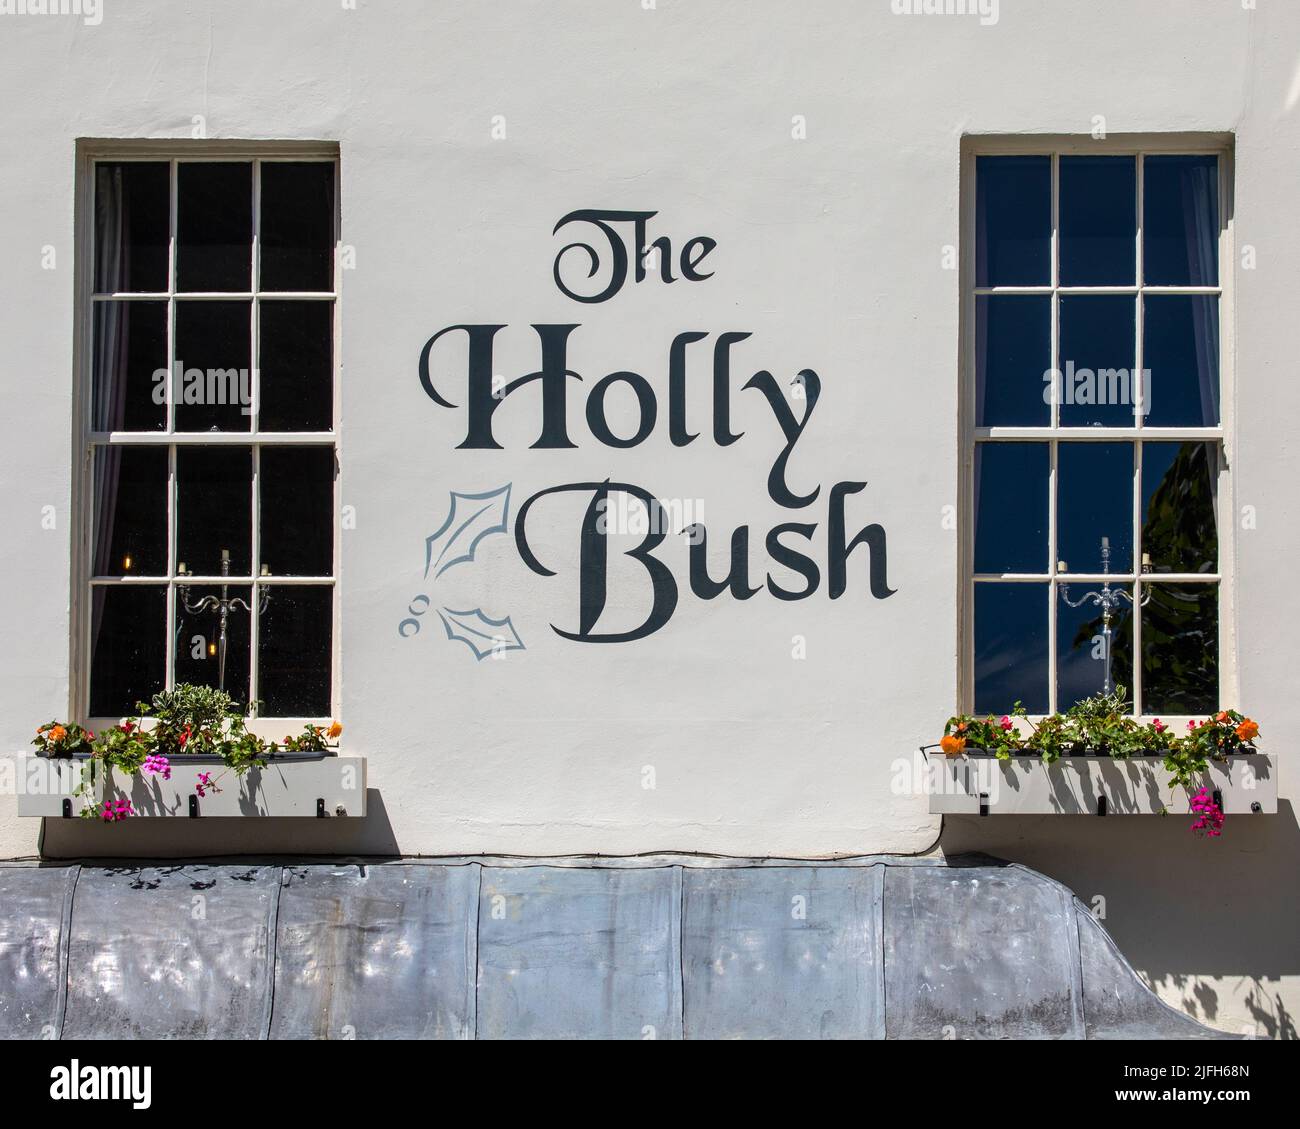 London, UK - May 19th 2022: The exterior of The Holly Bush pub, in the Hampstead area of London, UK. Stock Photo